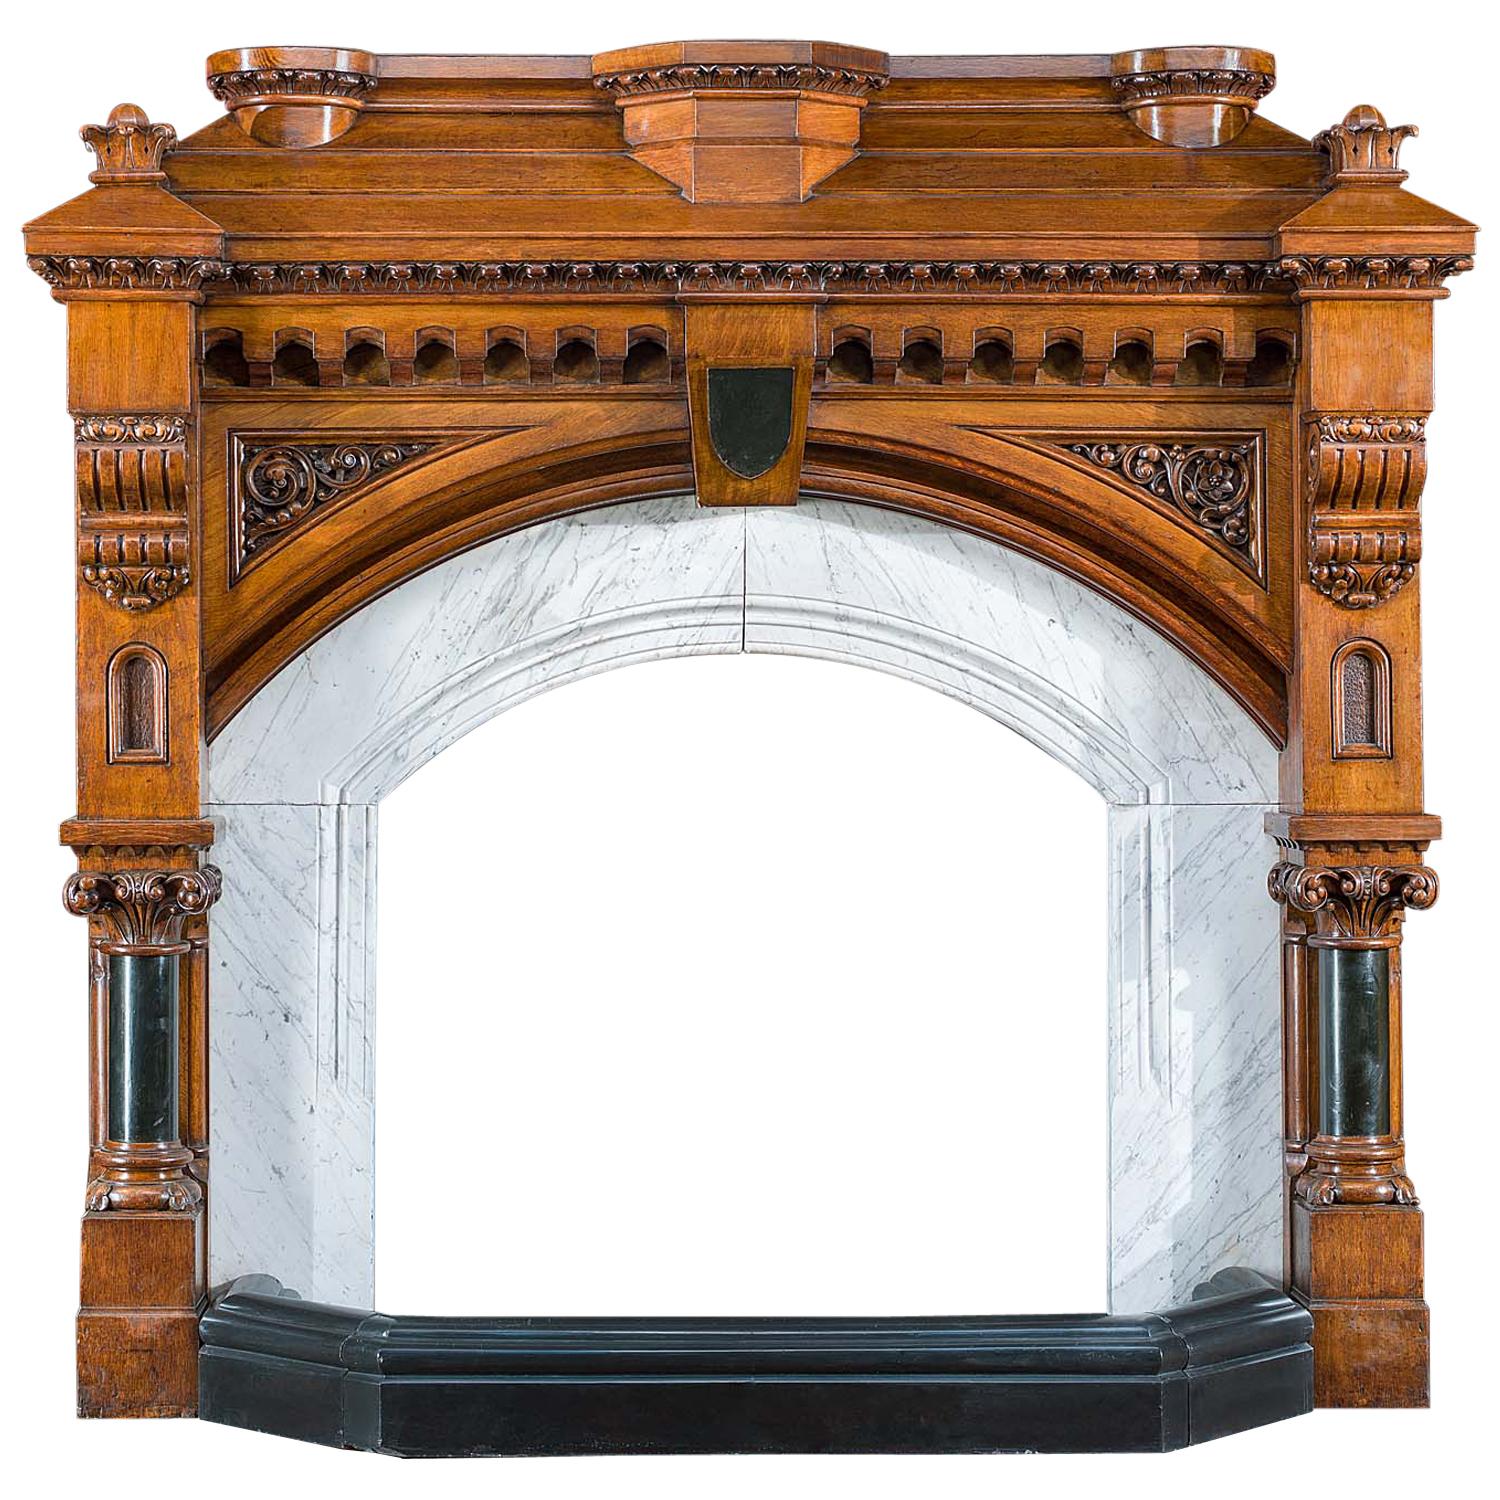 Gothic Revival Carved Oak Fireplace 